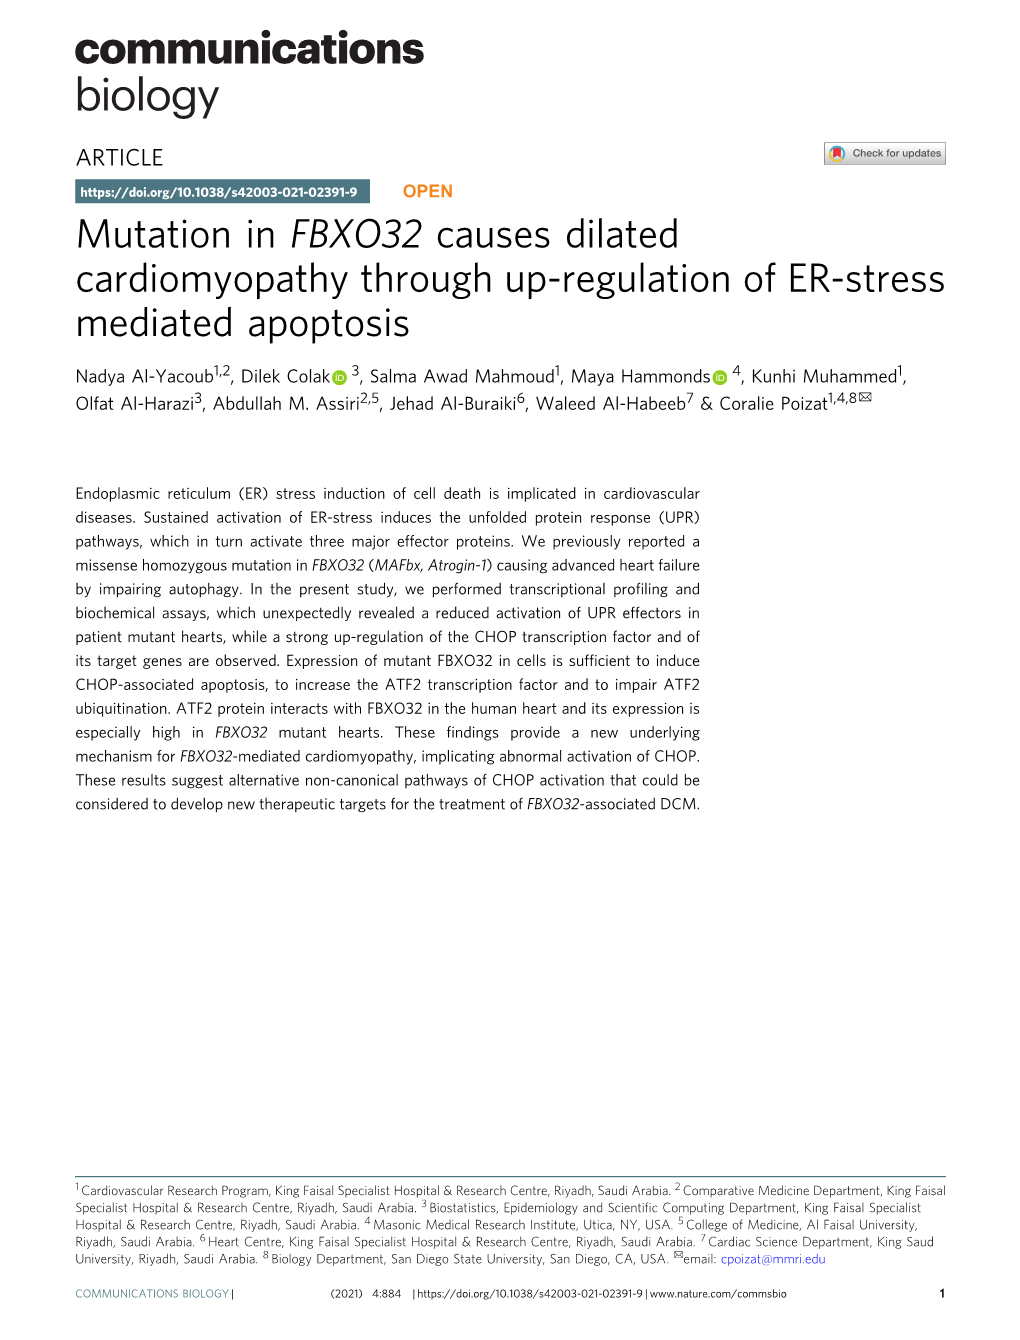 Mutation in FBXO32 Causes Dilated Cardiomyopathy Through Up-Regulation of ER-Stress Mediated Apoptosis